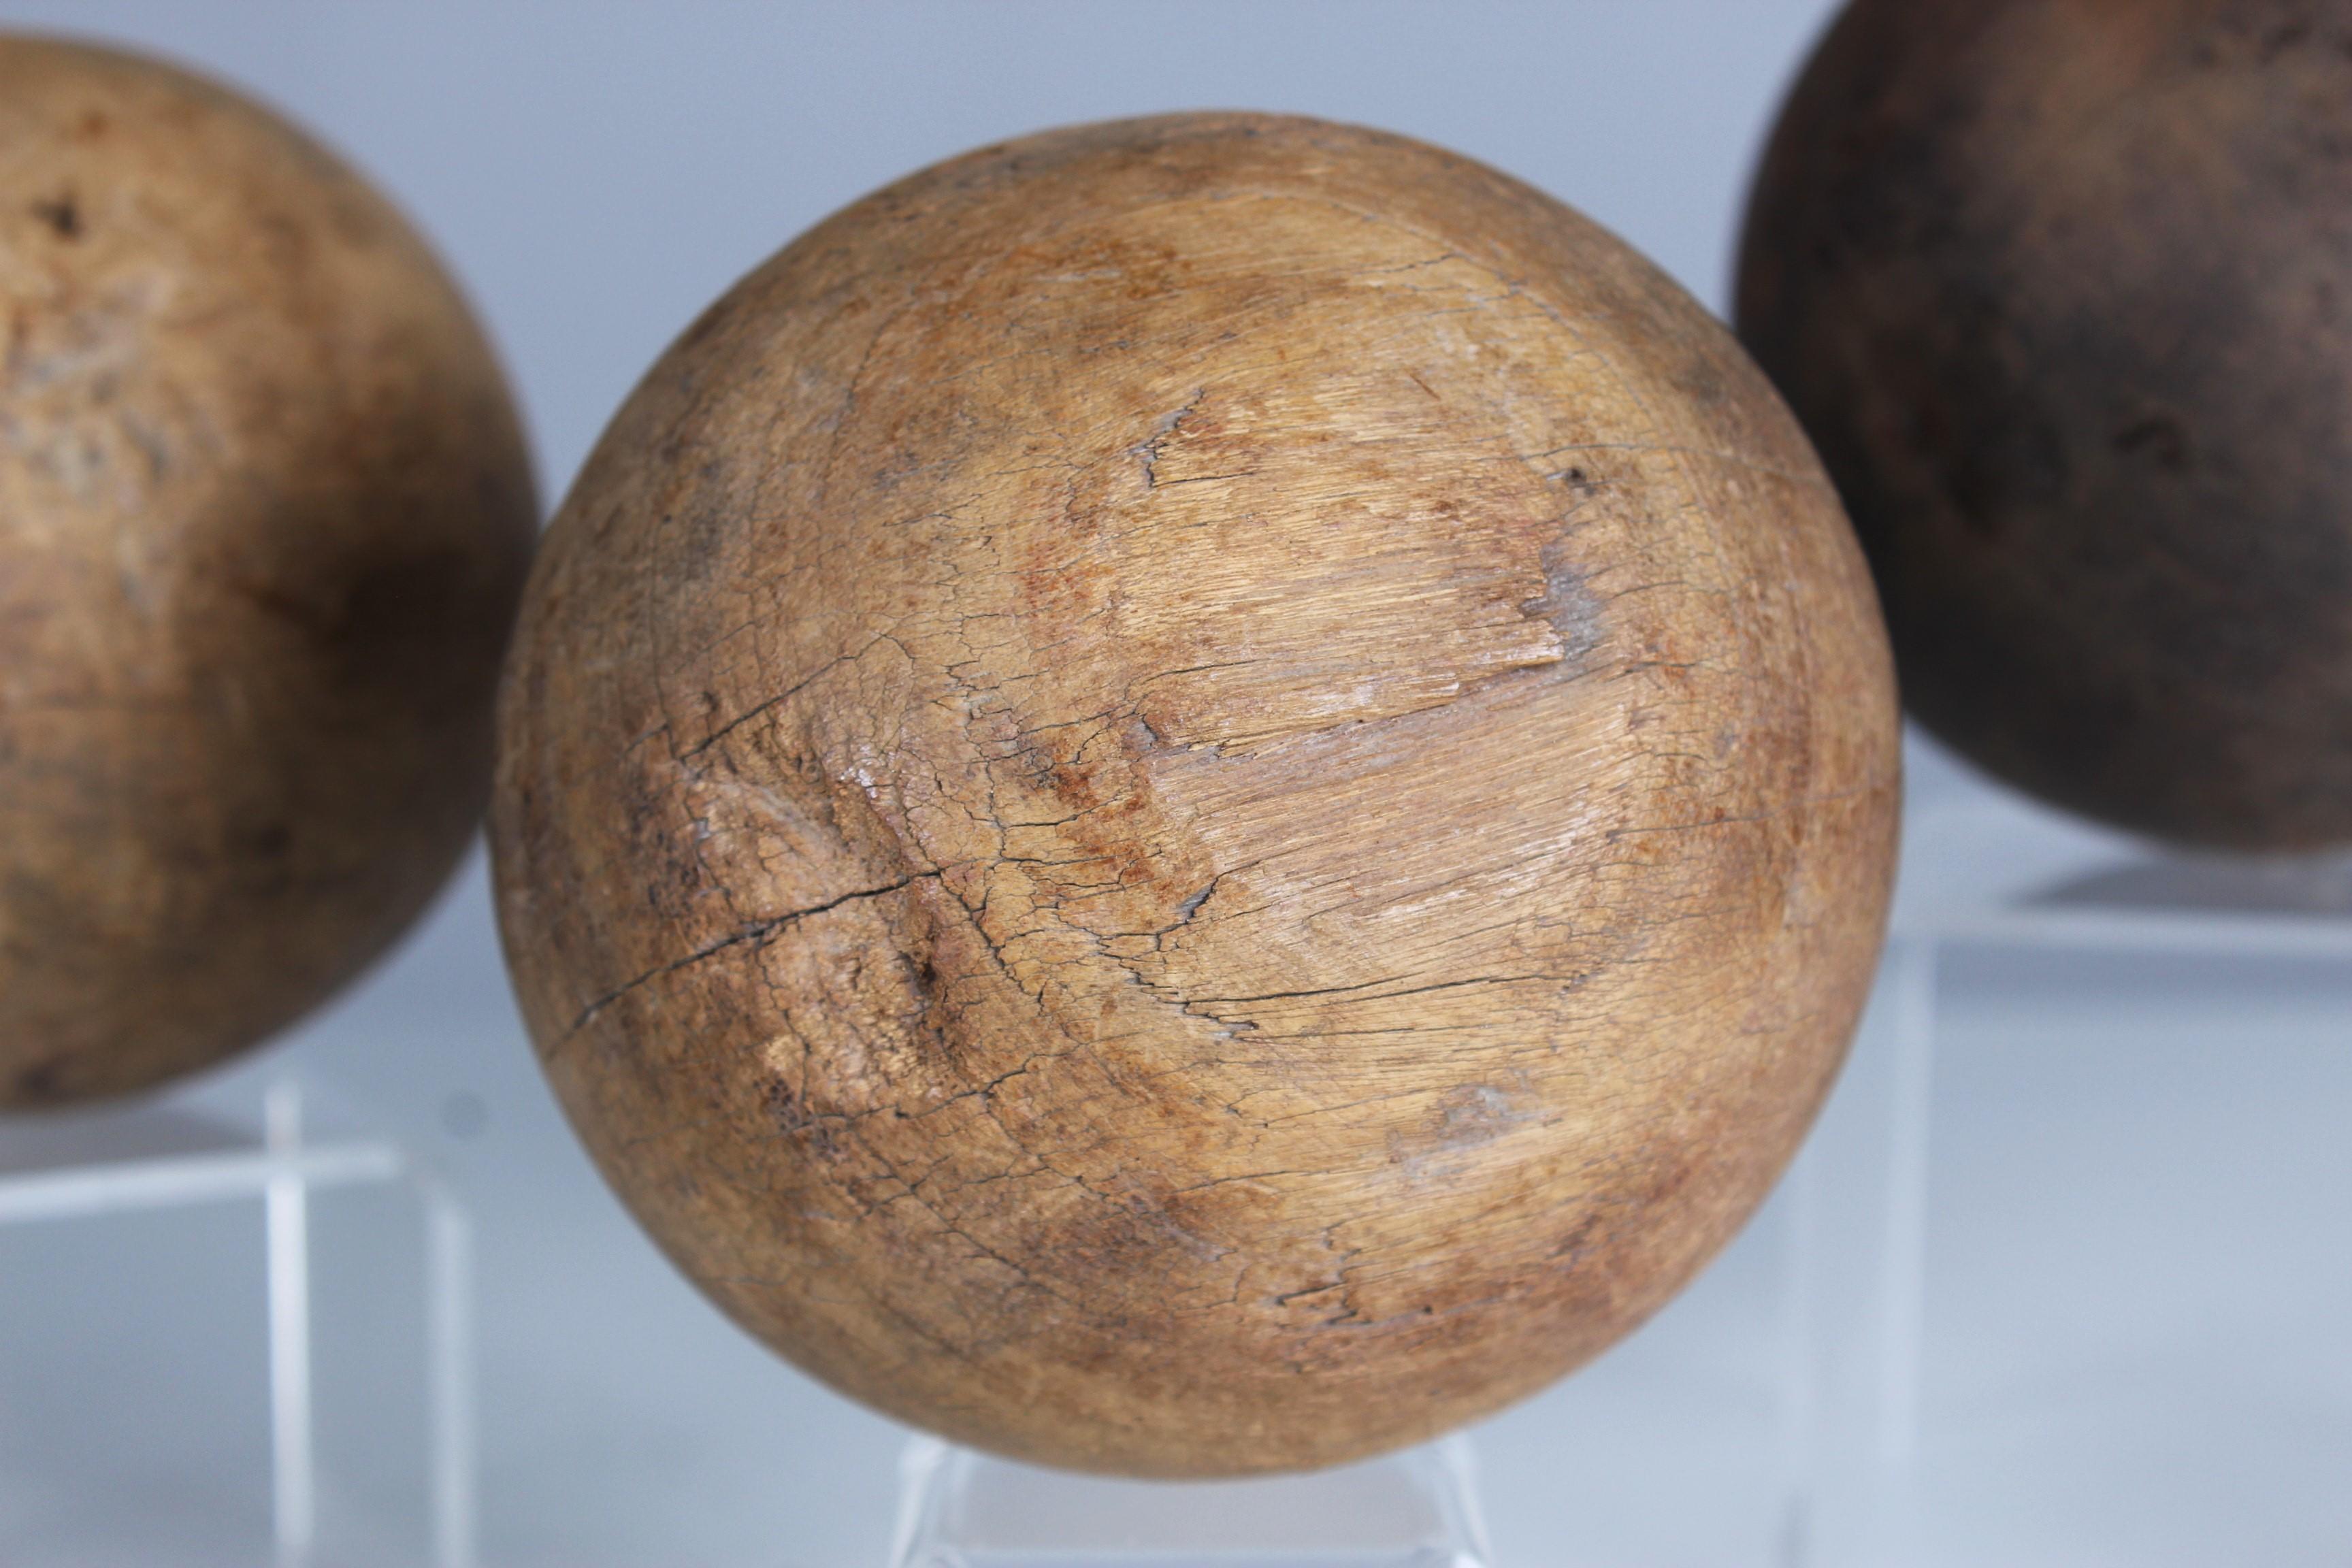 Beautiful, unique Boule set of three Boule balls and one target ball, France, late 19th century.

In the 19th century, the manufacture of boule balls underwent significant development in France as the game of boules, particularly the pétanque